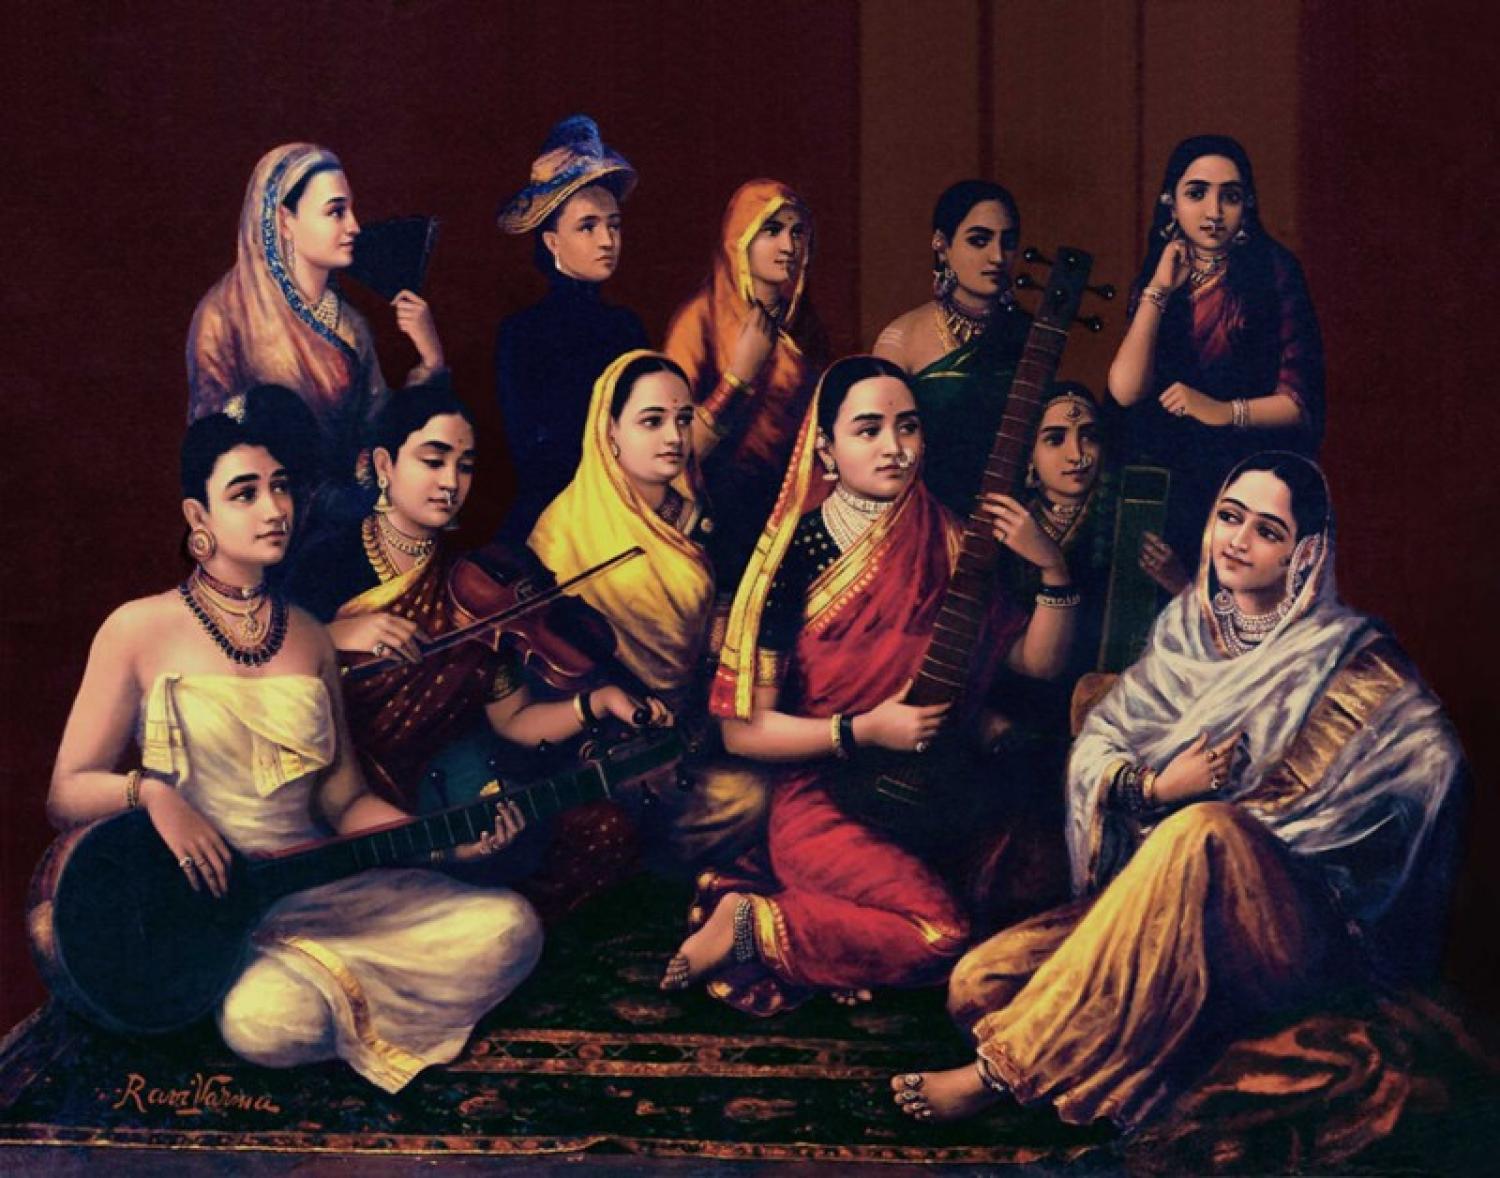 Galaxy of Musicians, by Raja Ravi Varma 1889, depicting modes of women’s dress from around India at the time. A Muslim courtesan, possibly from Lucknow, is shown seated and her hair partially covered by a gauzy white shawl, front right (Wikimedia Commons)